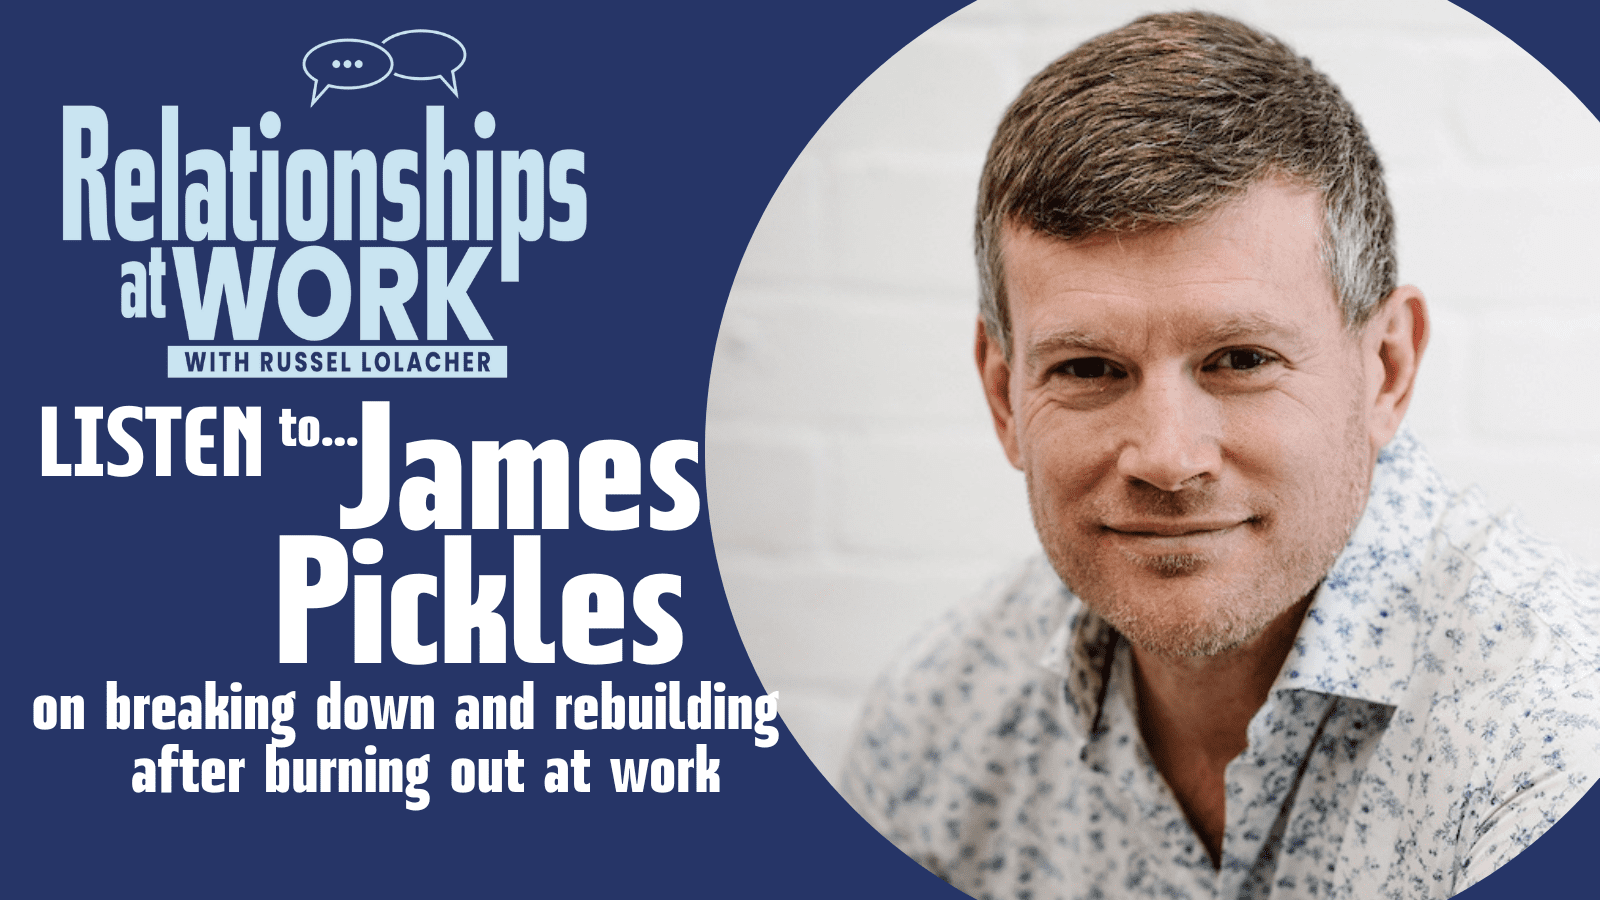 James Pickles on his personal journey of breaking down due to burnout at work and rebuilding himself